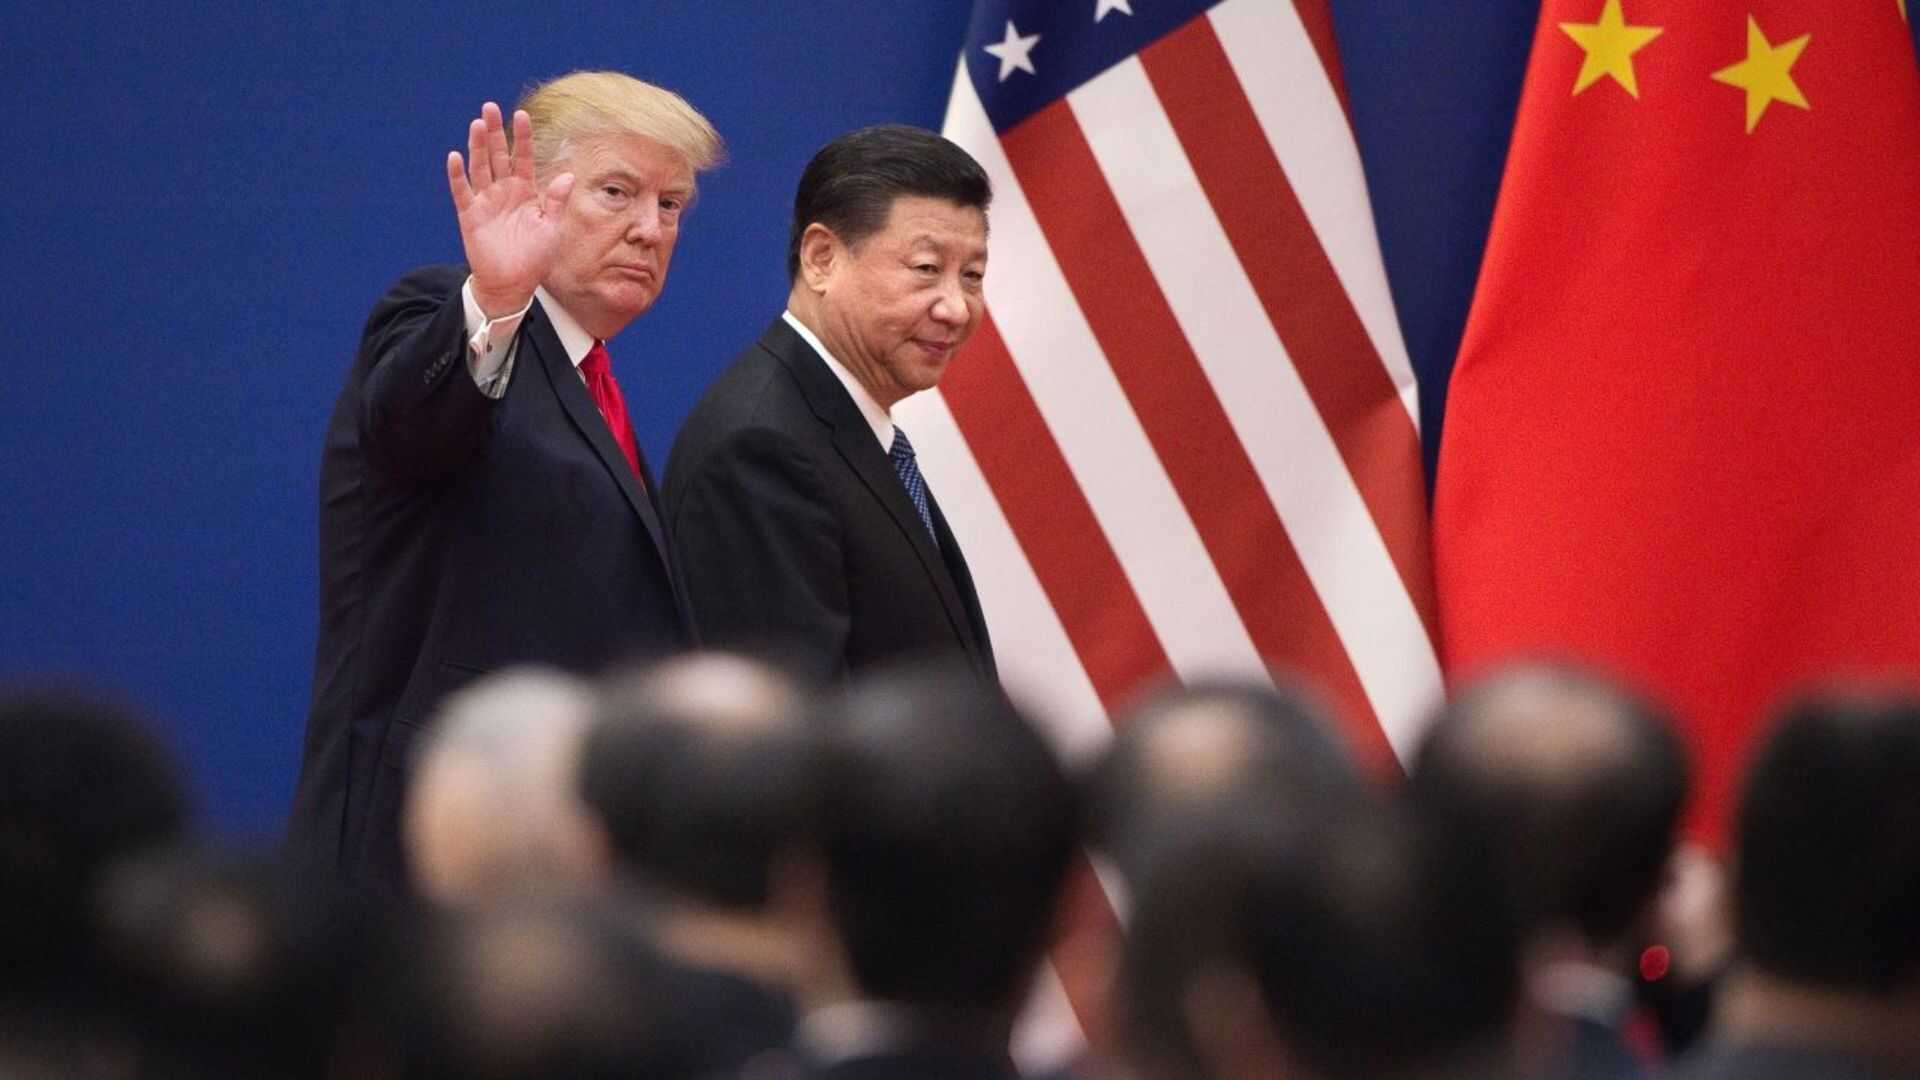 Trump Reveals “Beautiful Note” From Xi Jinping After Assassination Attempt